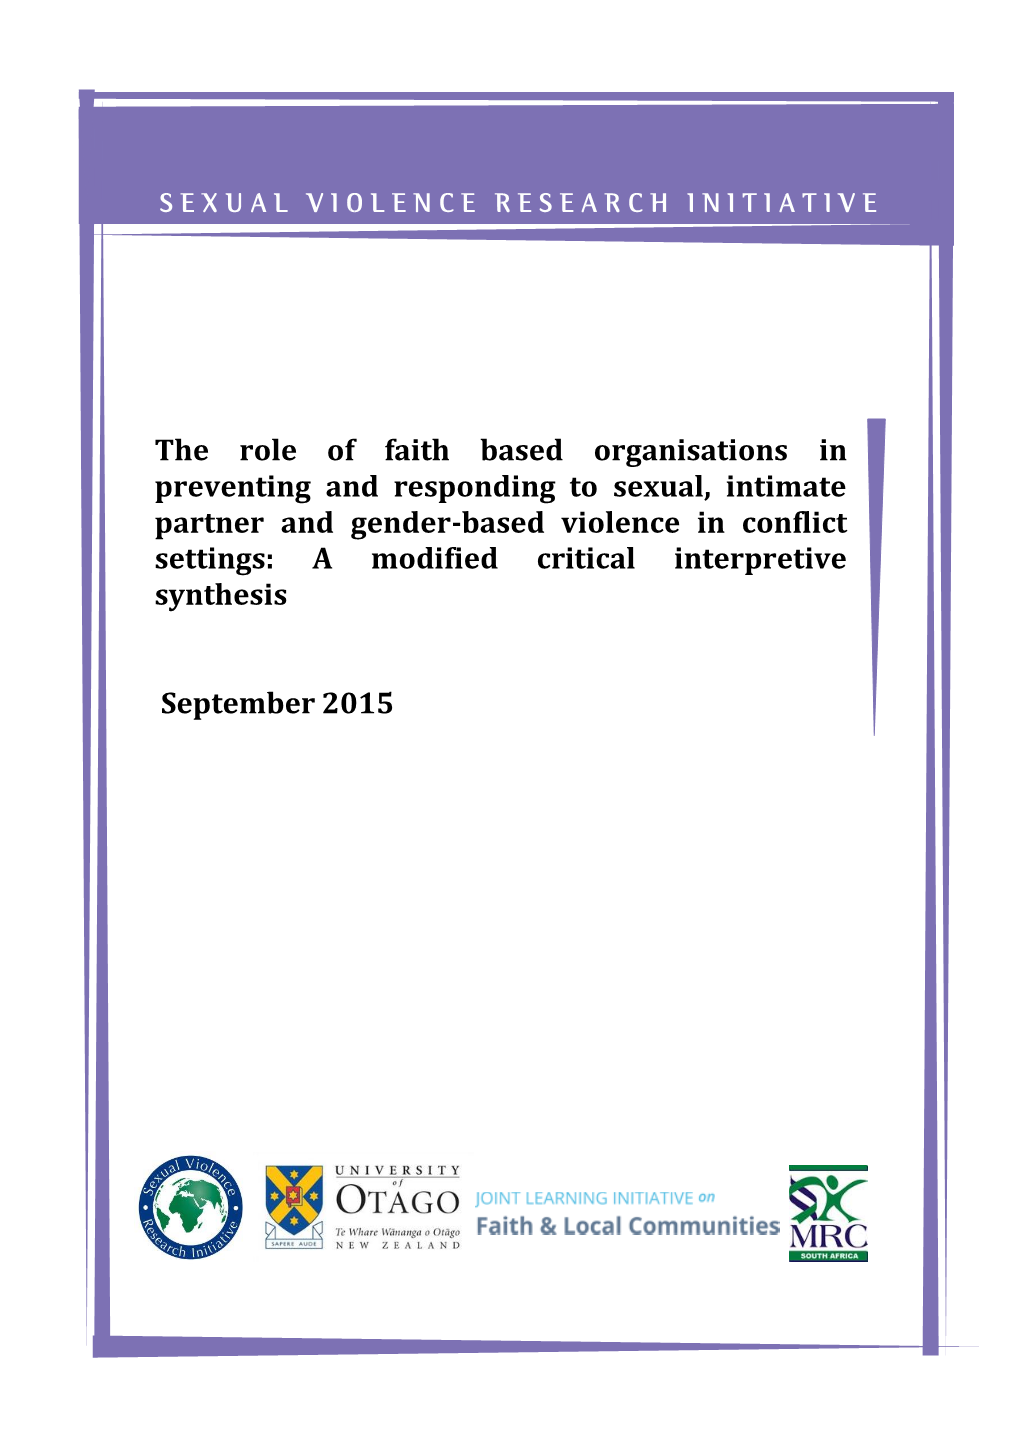 The Role of Faith Based Organisations in Preventing and Responding To